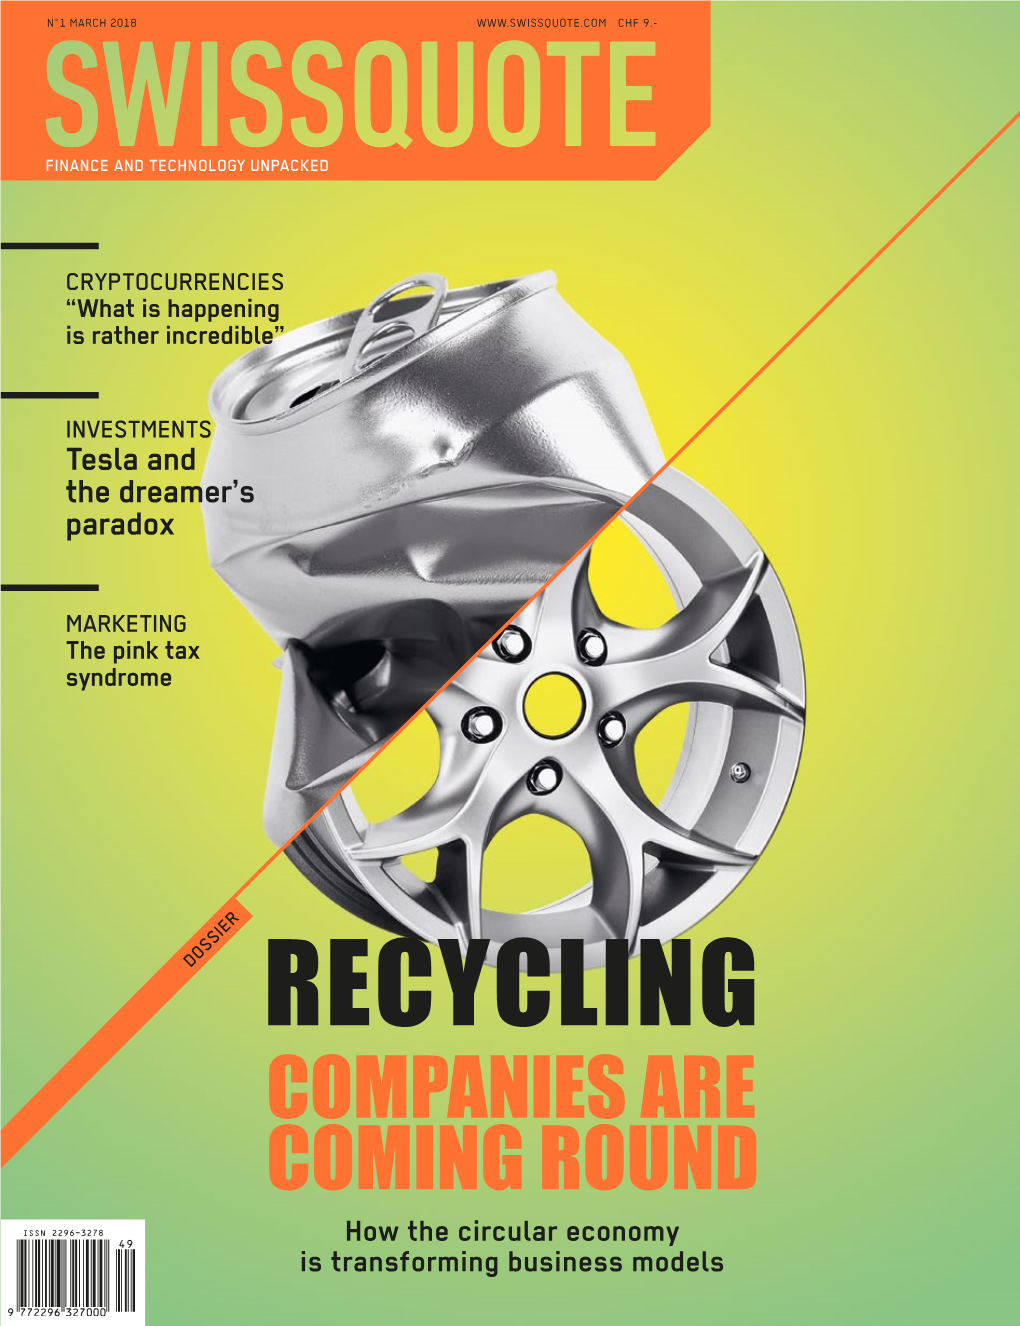 RECYCLING COMPANIES ARE COMING ROUND How the Circular Economy Is Transforming Business Models